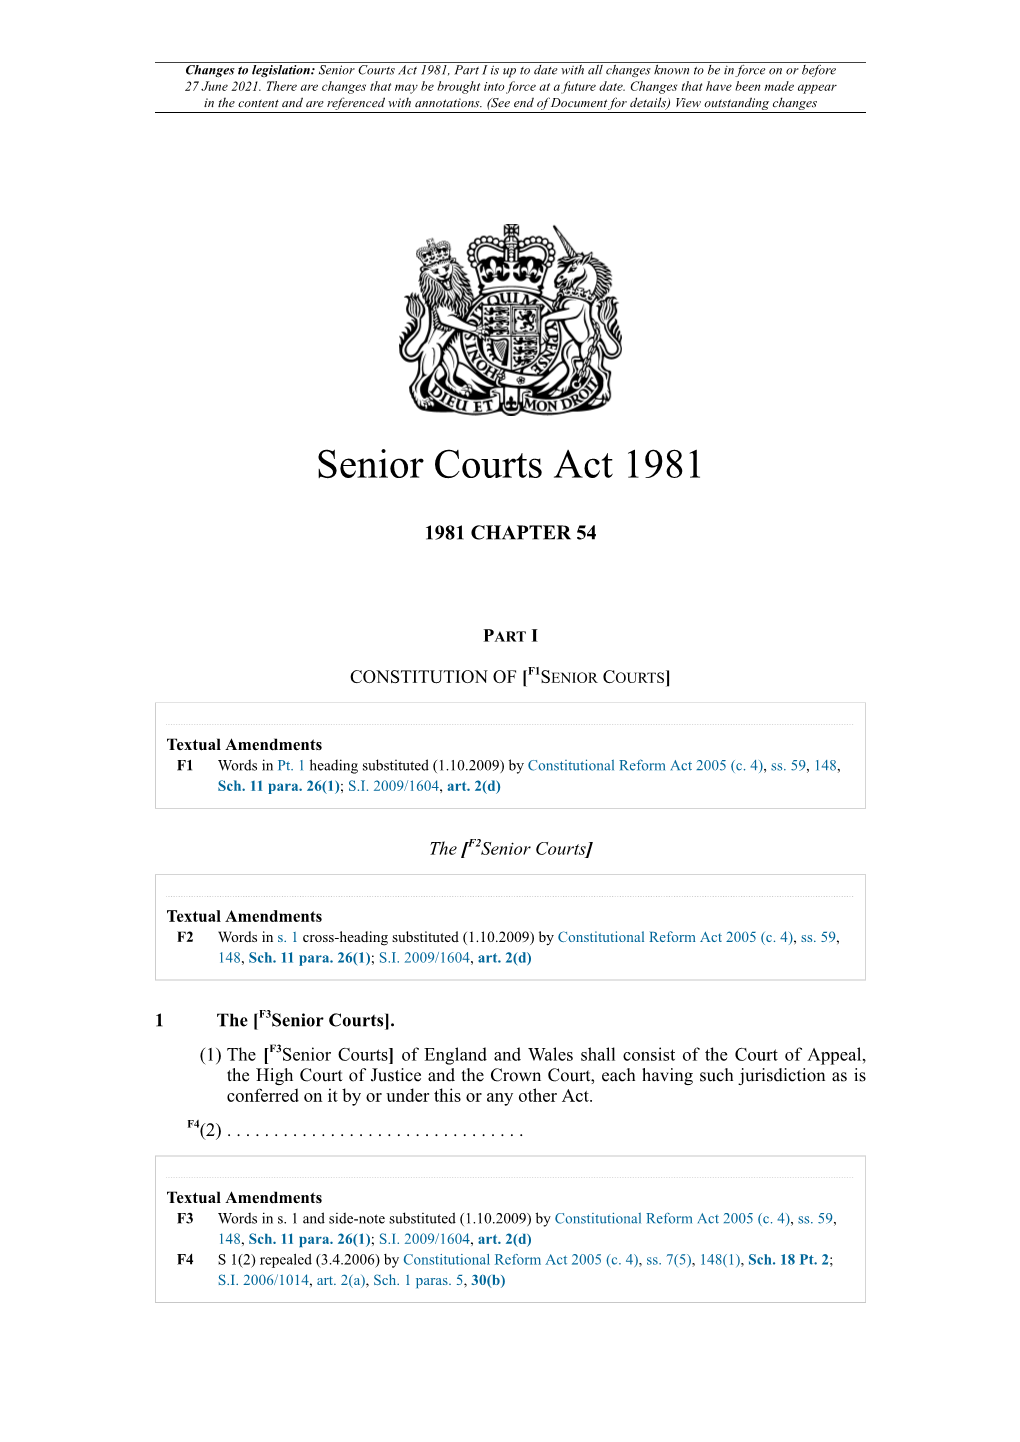 Senior Courts Act 1981, Part I Is up to Date with All Changes Known to Be in Force on Or Before 27 June 2021